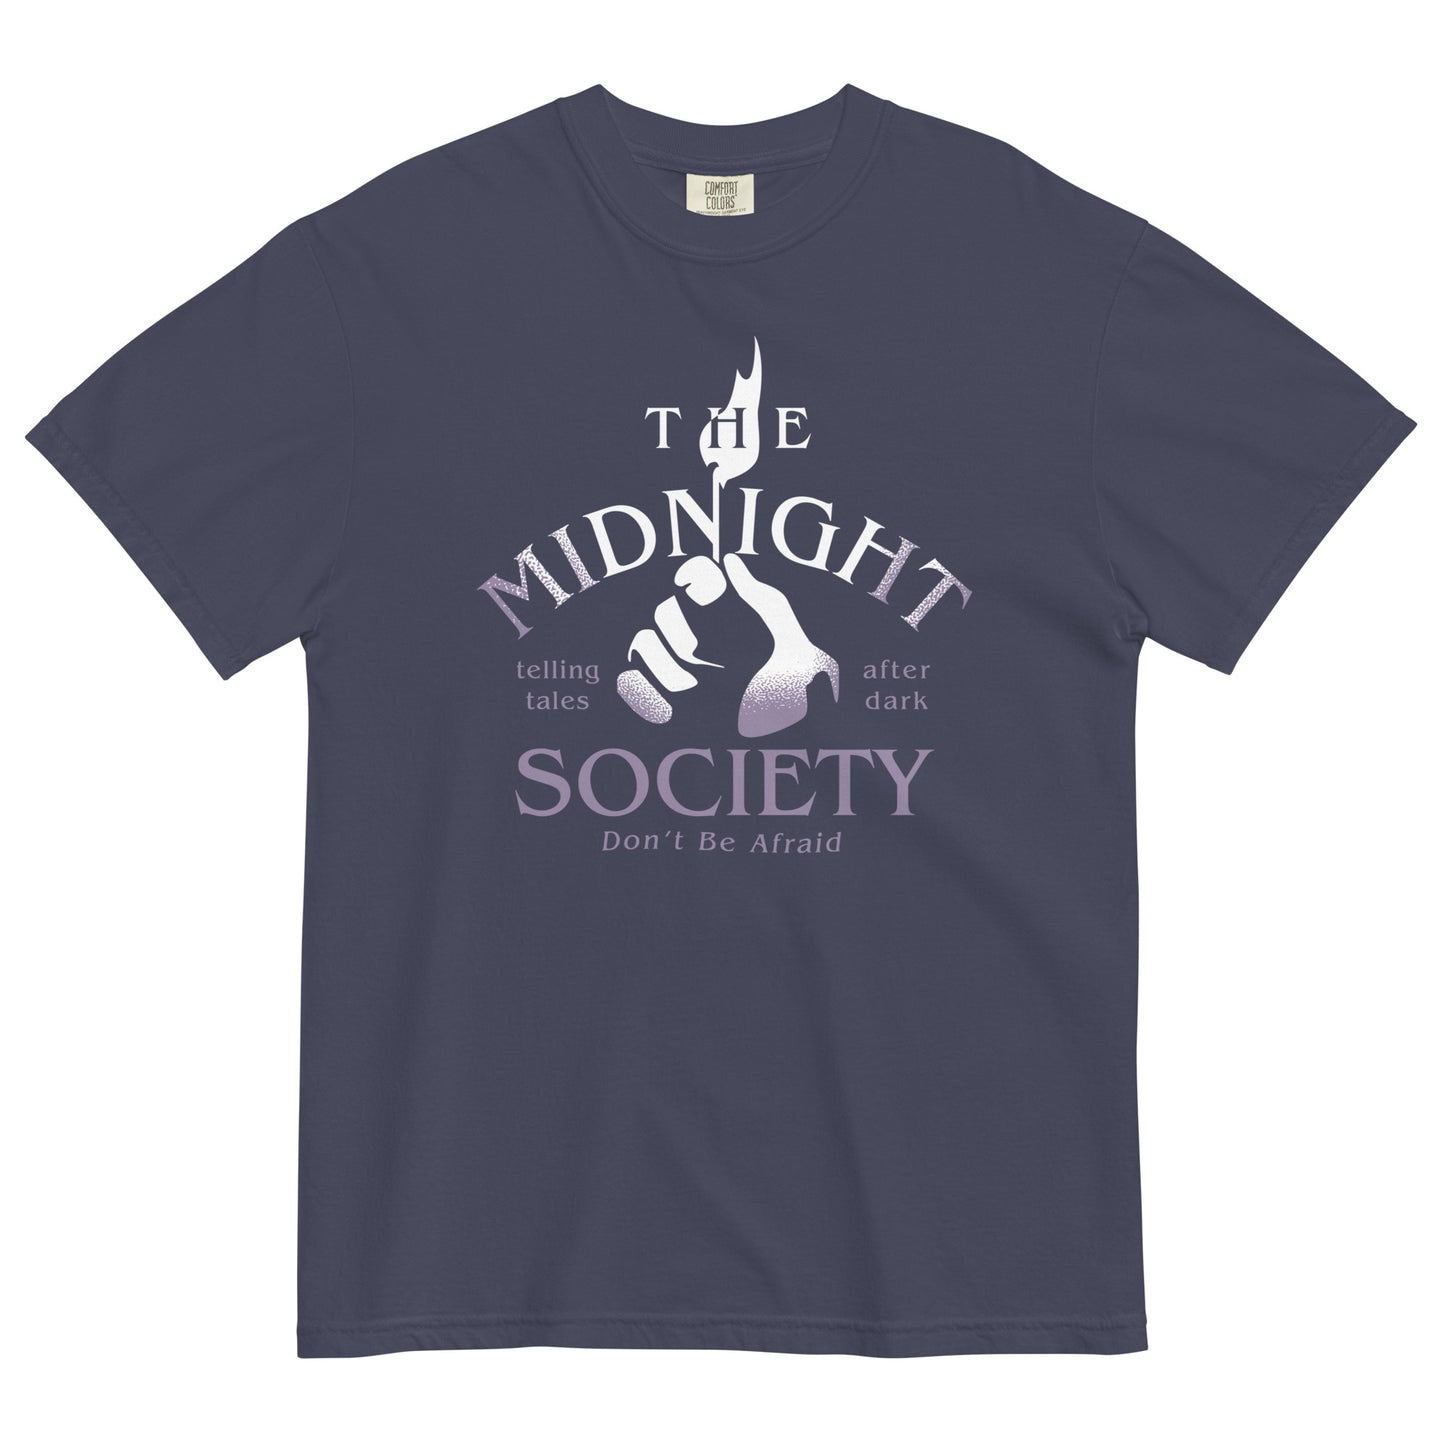 The Midnight Society Men's Relaxed Fit Tee